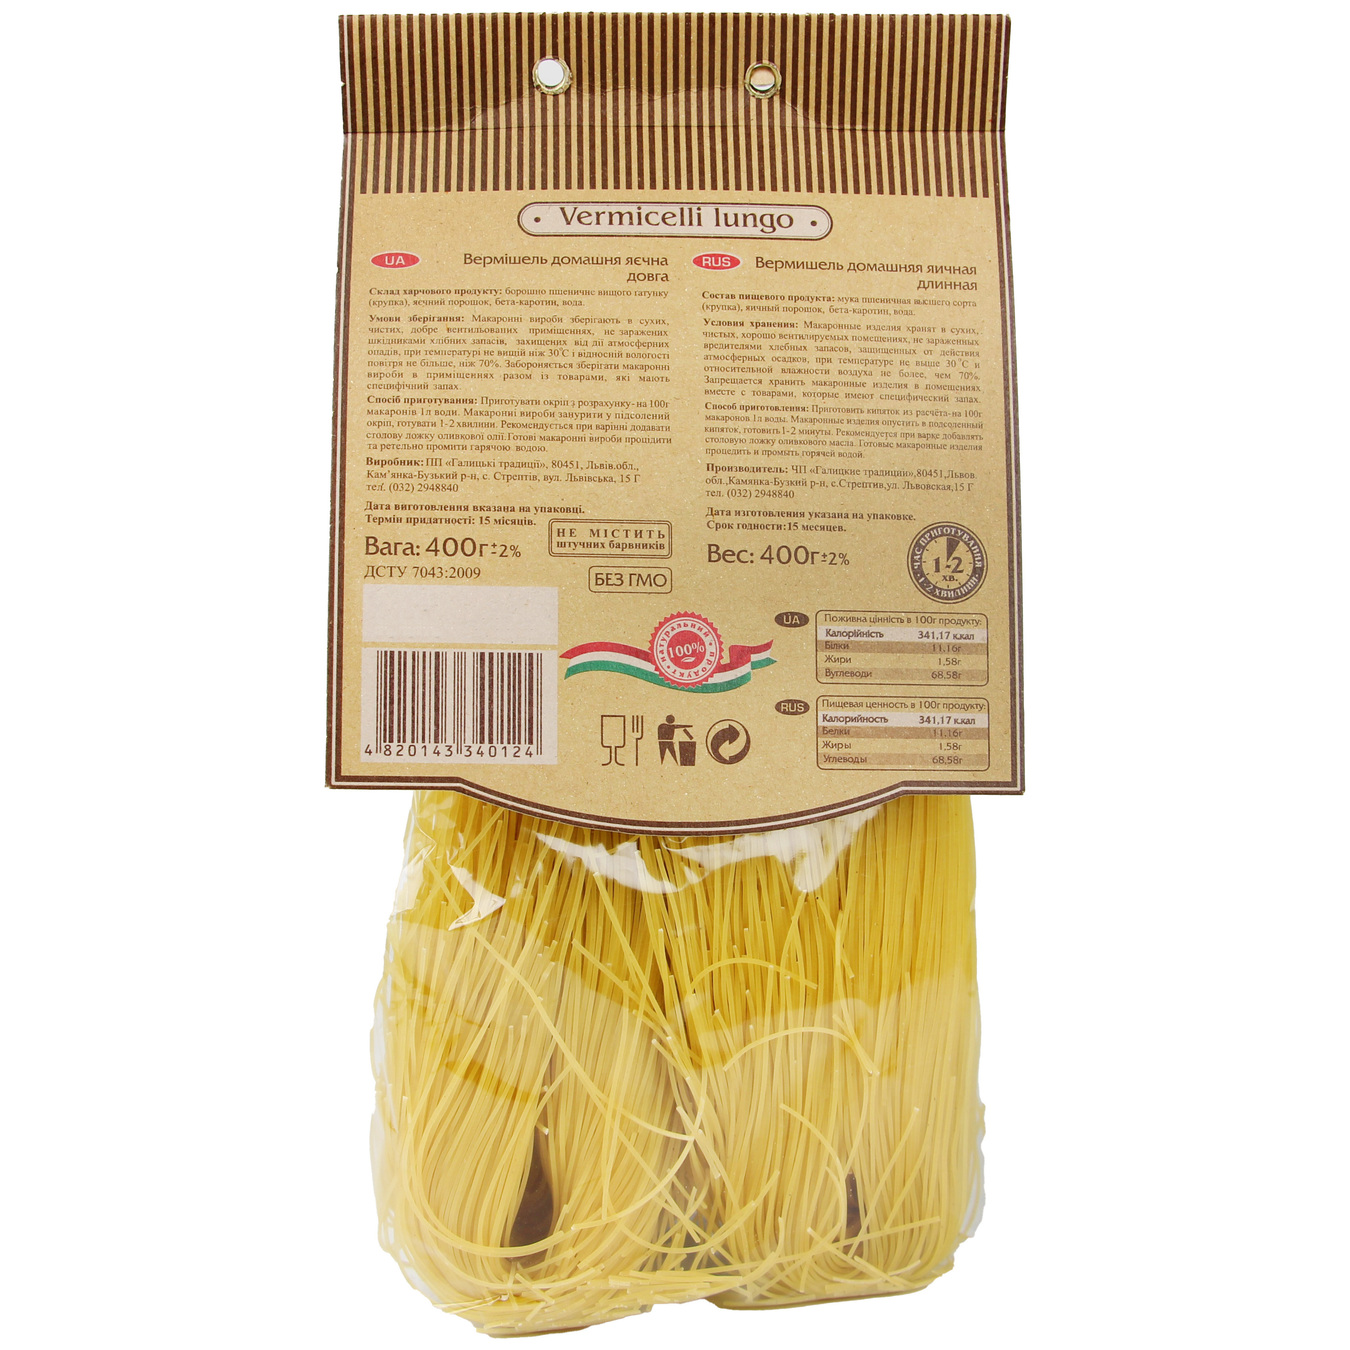 Galician Traditions Homemade Egg Vermicelli Lungo Pasta 400g 2